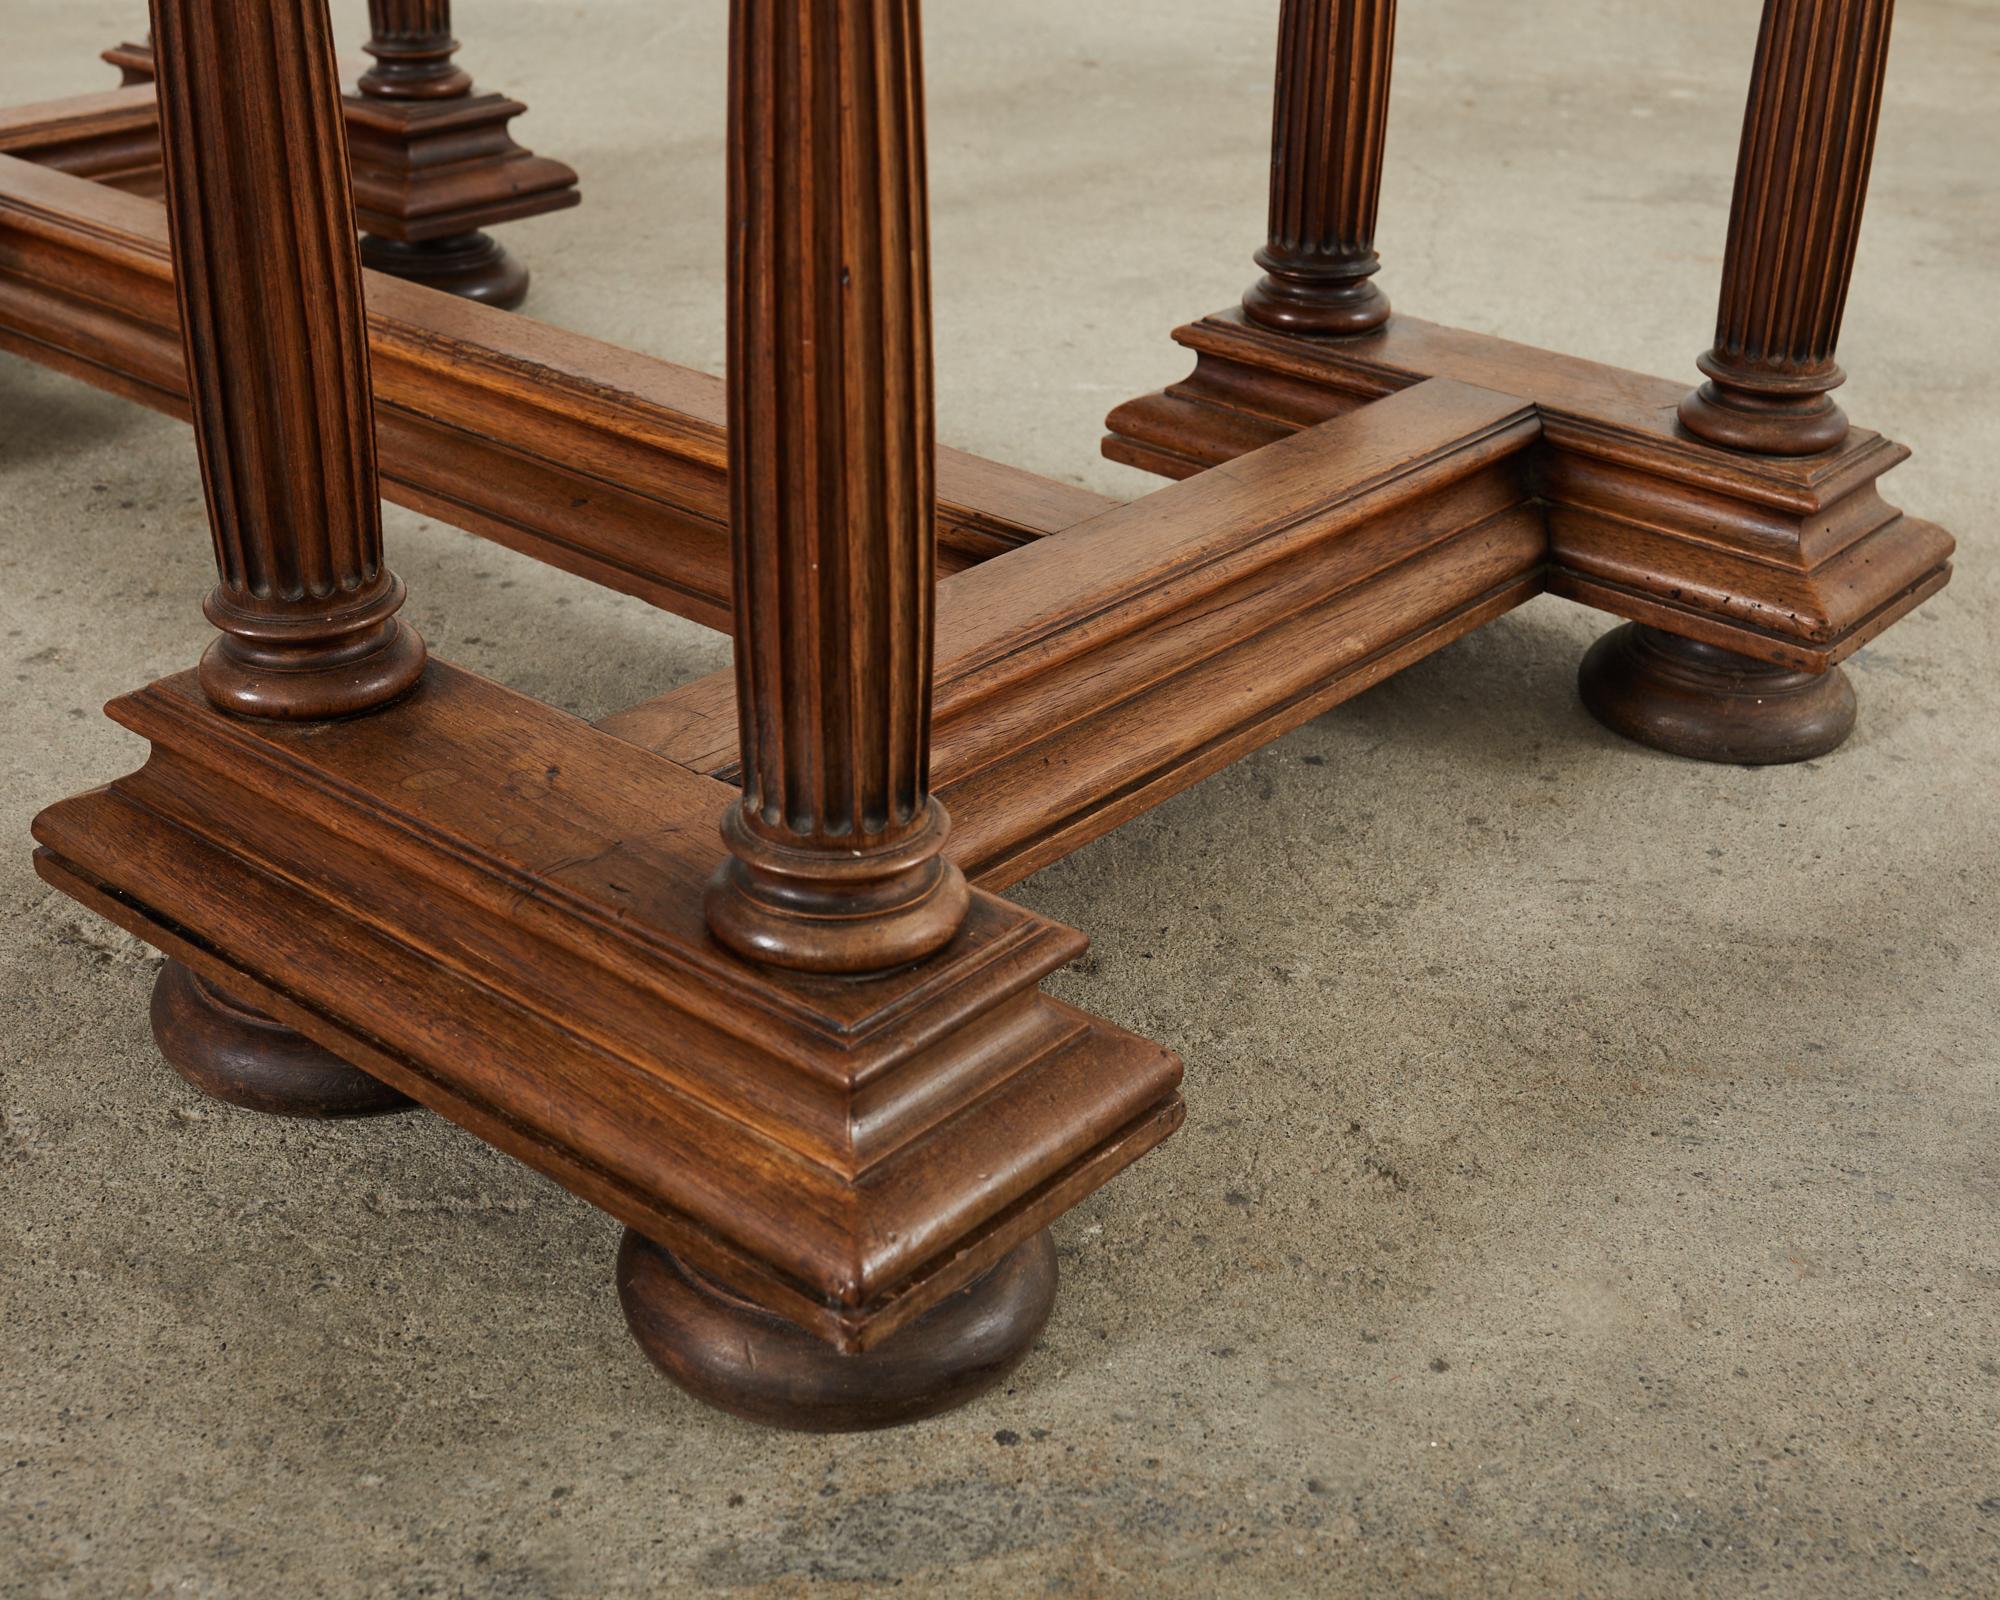 19th Century Neoclassical Style English Oak Library Table Desk  For Sale 6